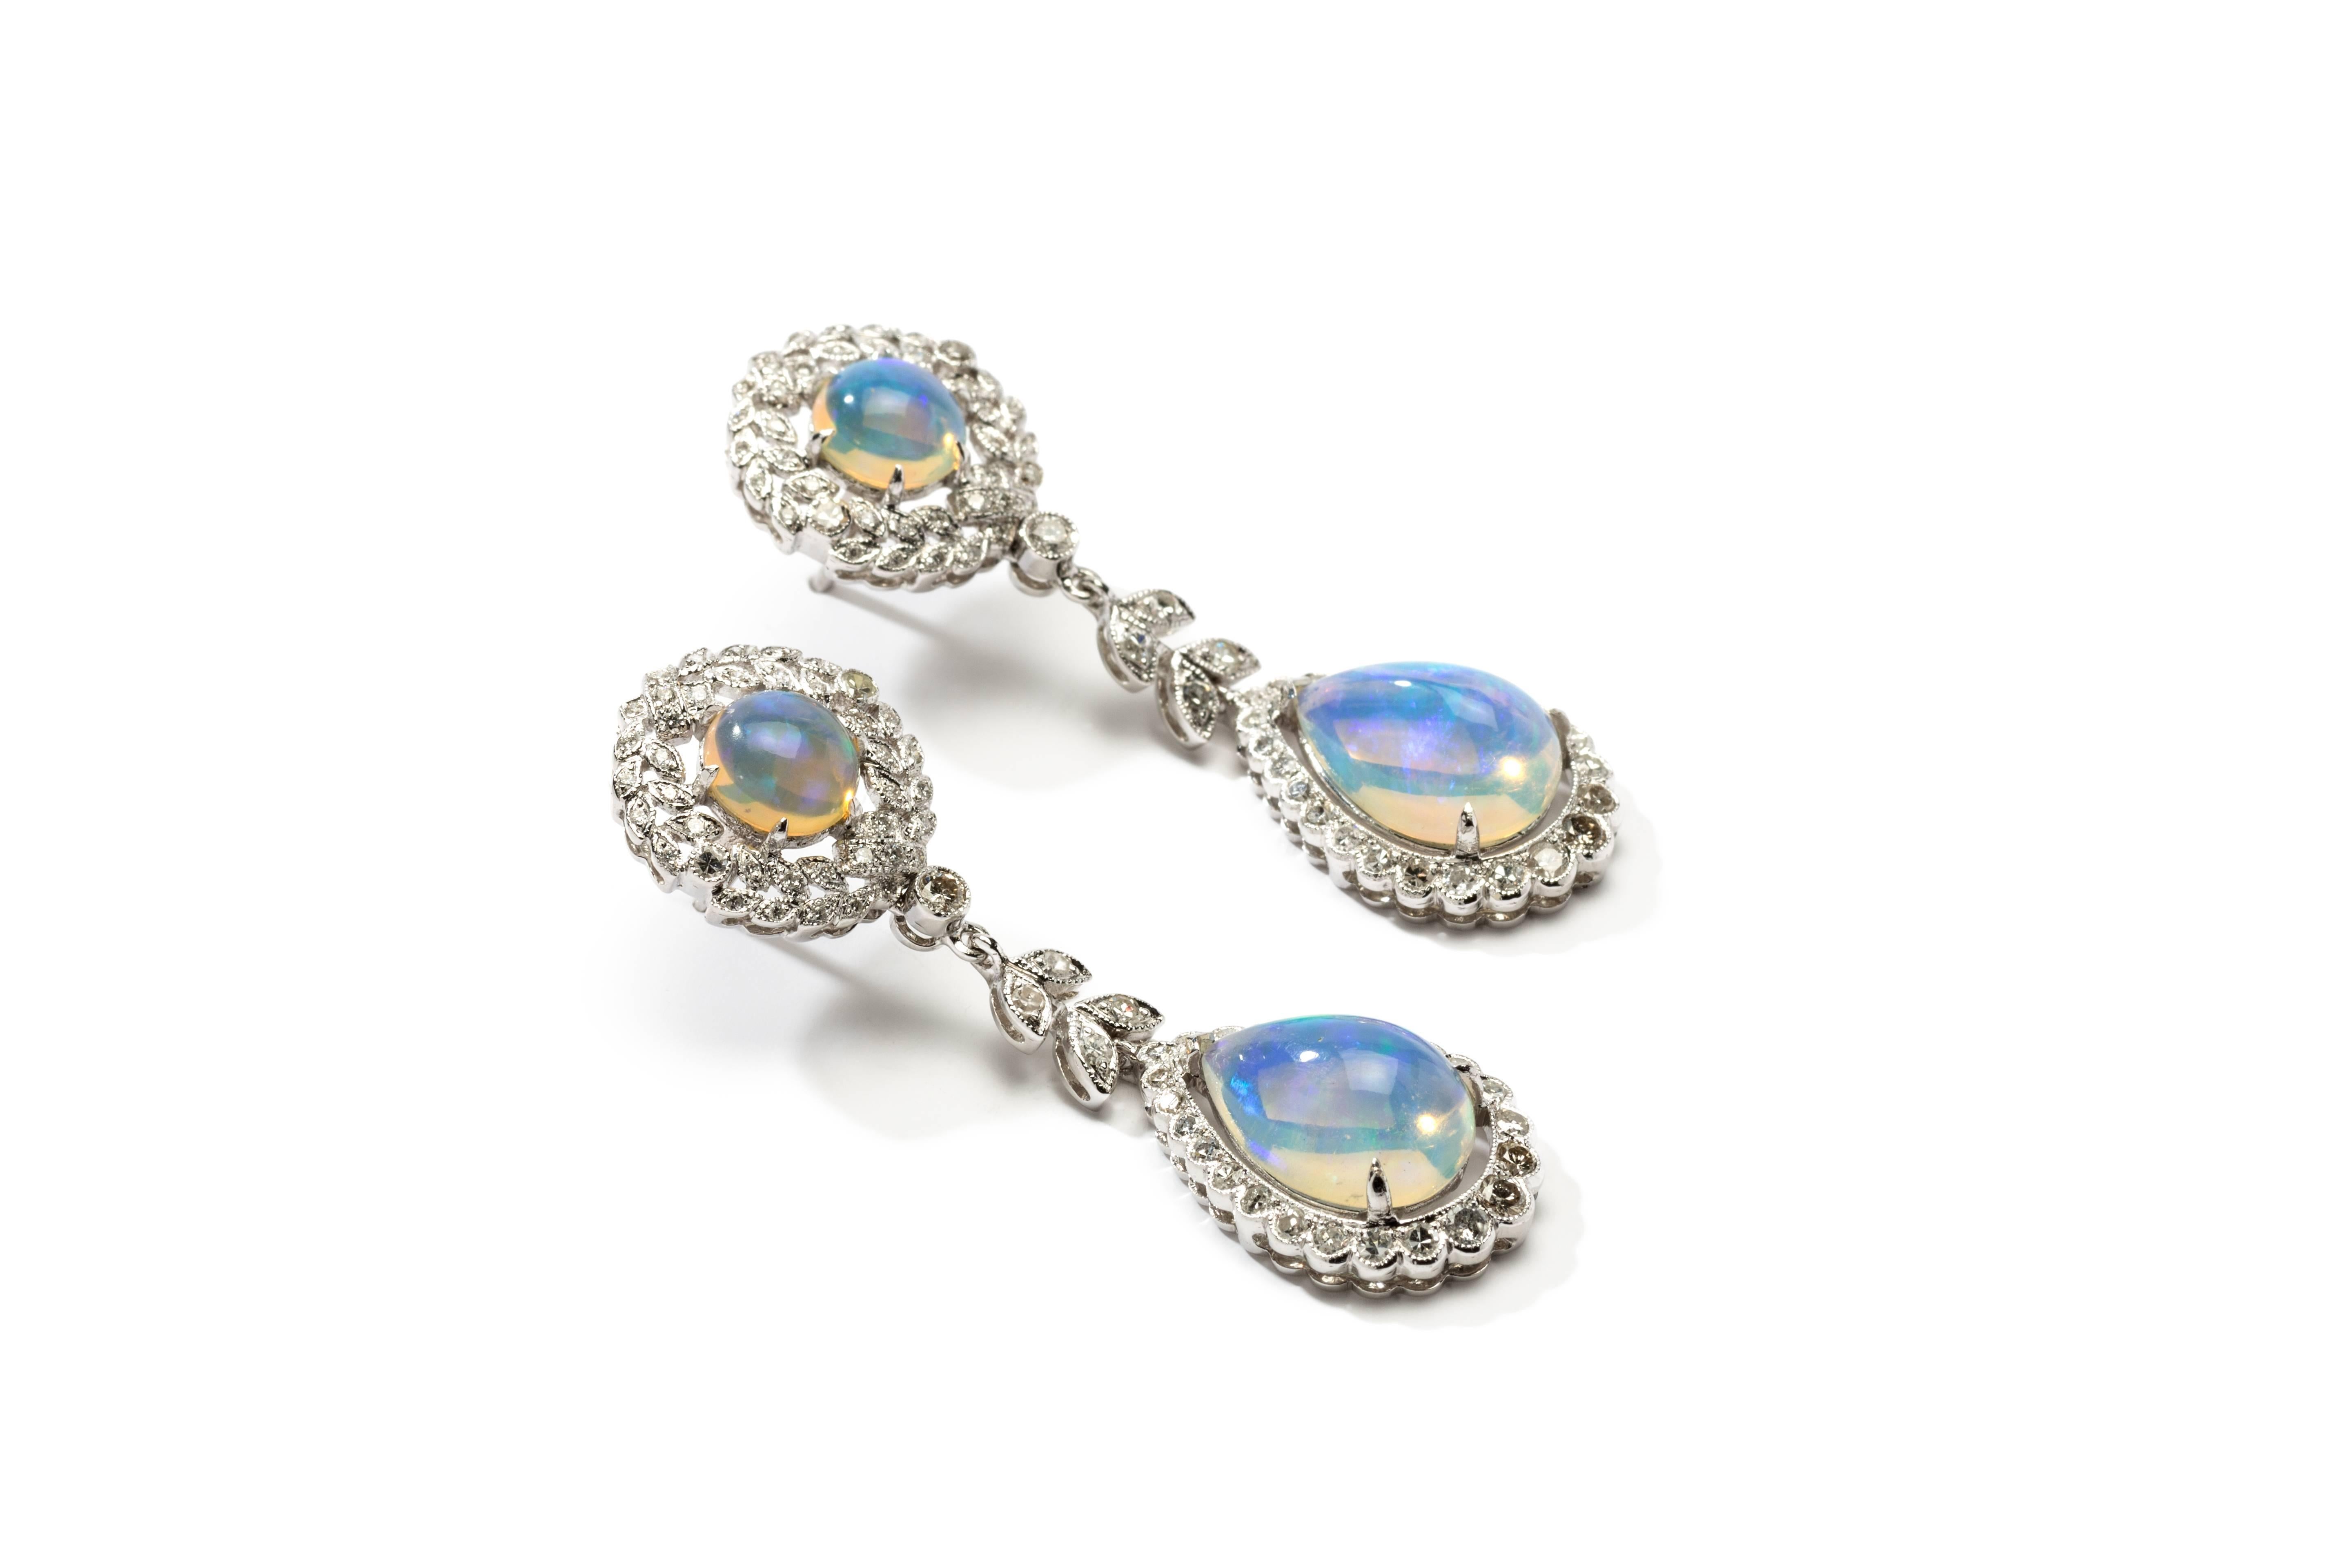 Set decorated with an 2 round- and 2 teardrop-shaped opal bordered by 192 diamonds and brilliant-cut diamonds weighing circa 1,57 ct. Mounted in 18 K white gold. Millegrain setting. On the back each hallmarked with the purity 750. Total weight: 9,86